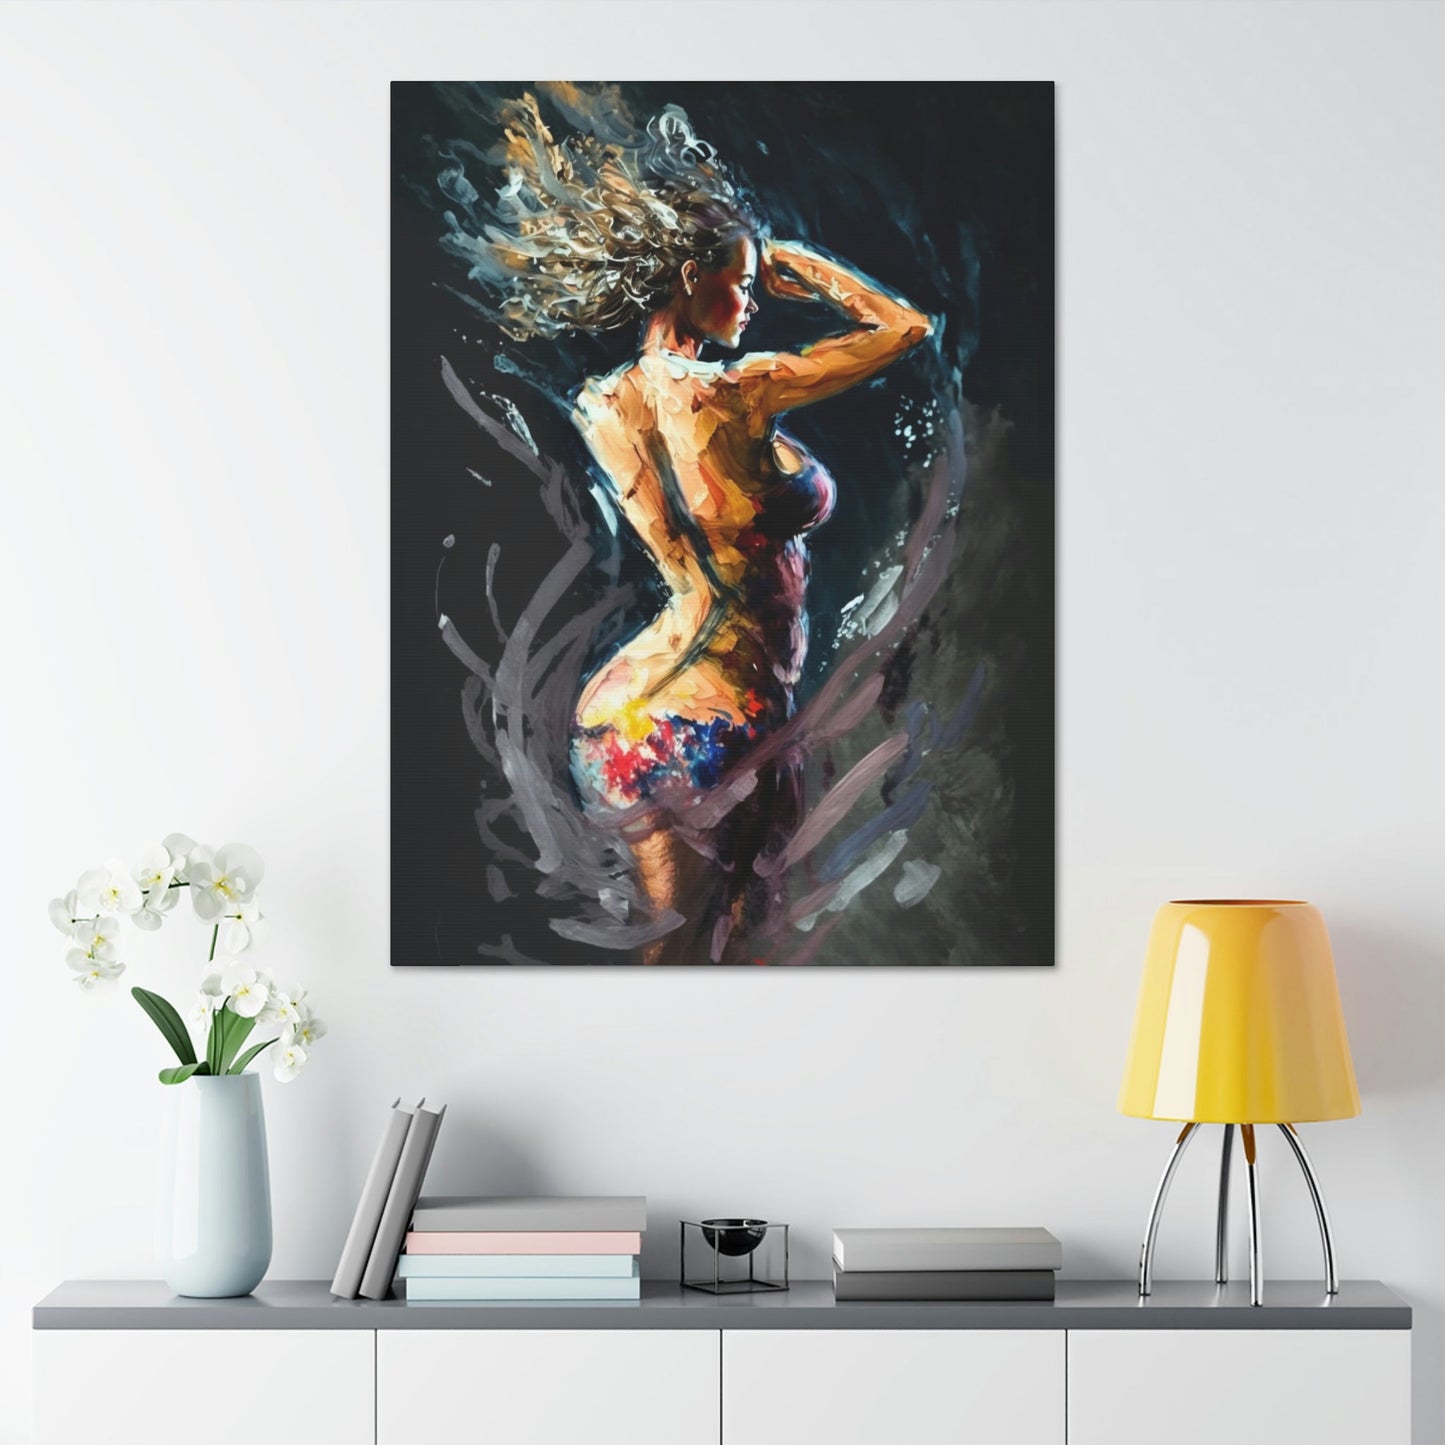 The Art of Movement: Canvas & Poster Print of Abstract Dance Figures